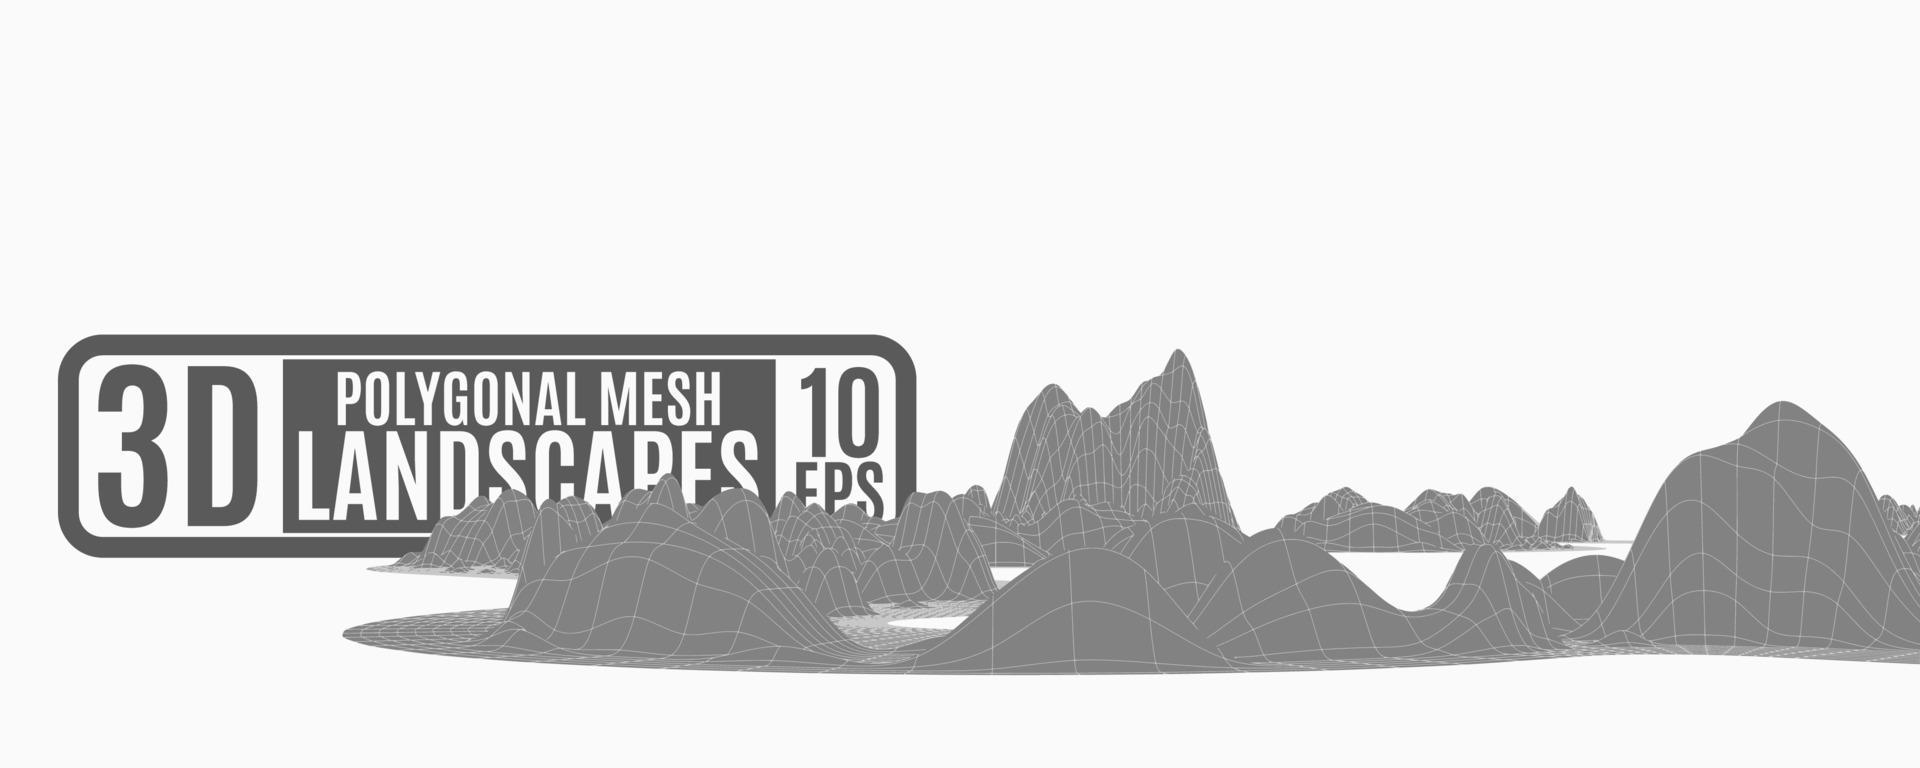 bright illustration with abstract polygonal mountains of nets vector